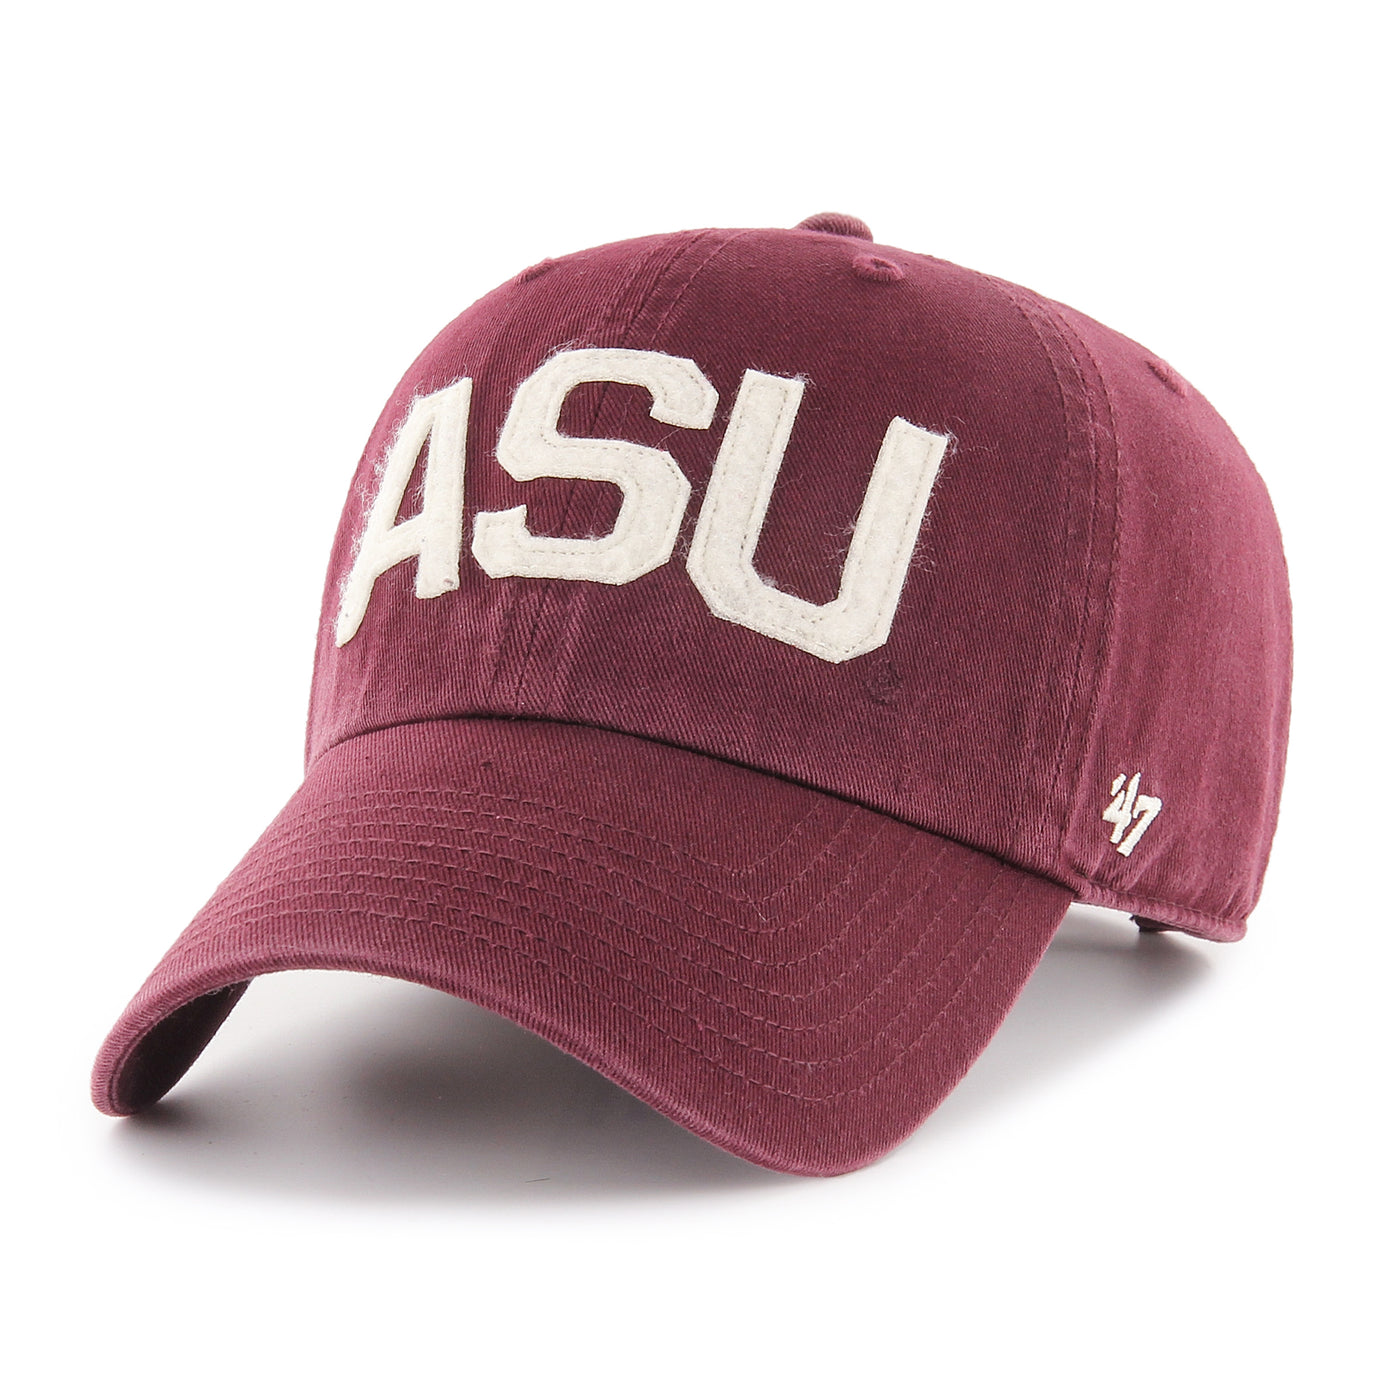 ASU maroon hat with ASU in white stitched college font on the front. The side of the hat features the sewn '47 logo. 